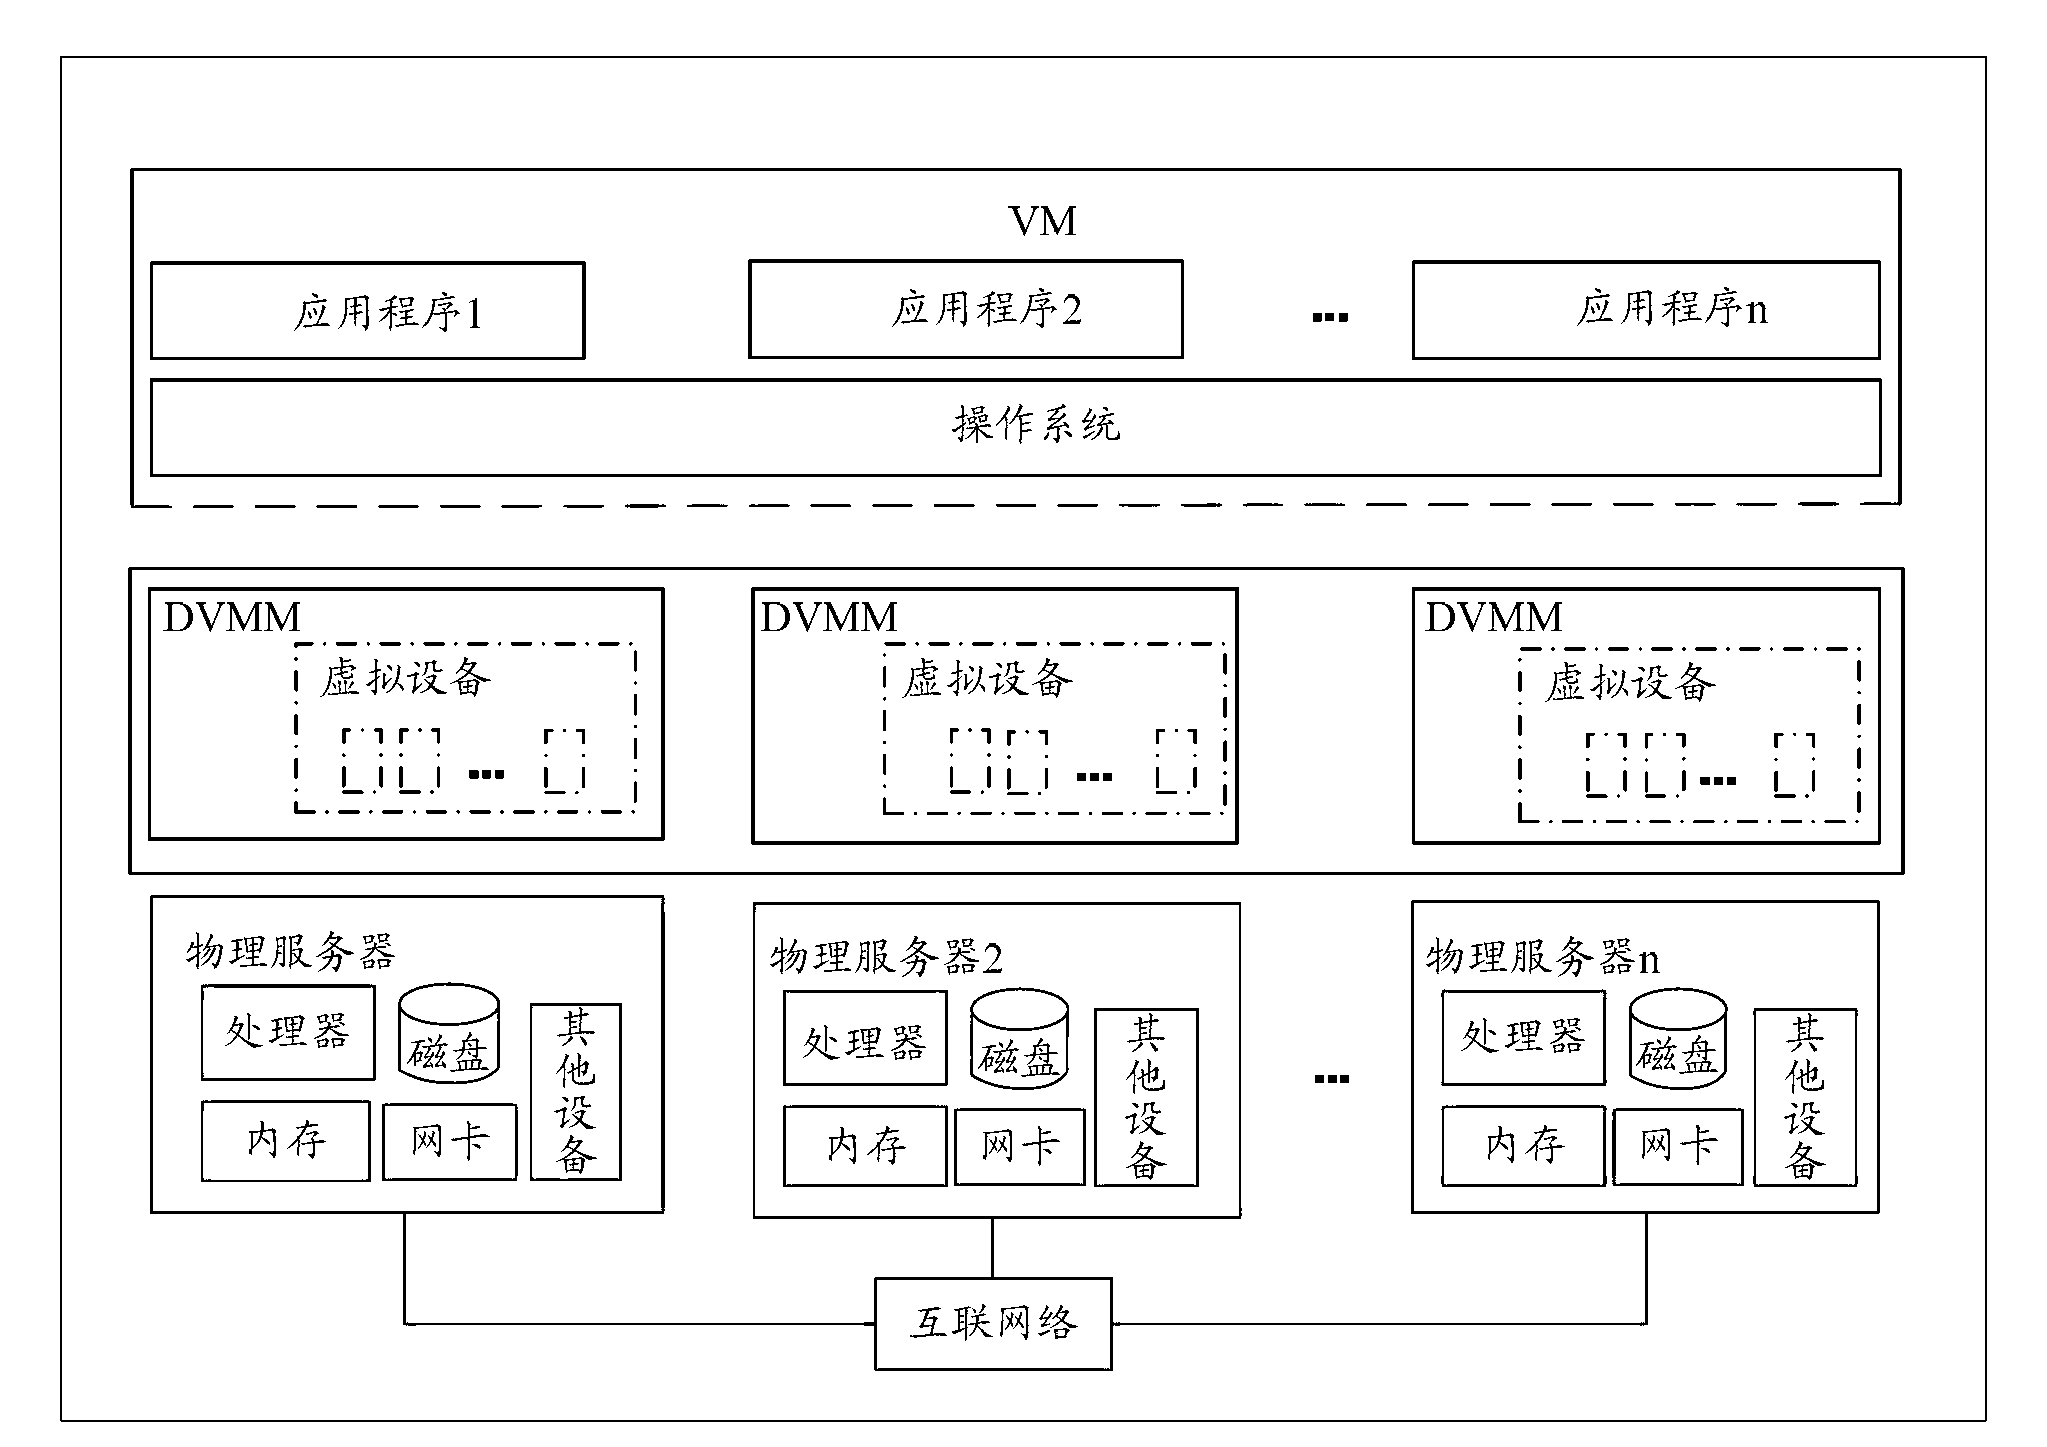 Virtual interrupt management method and device of distributed virtual system